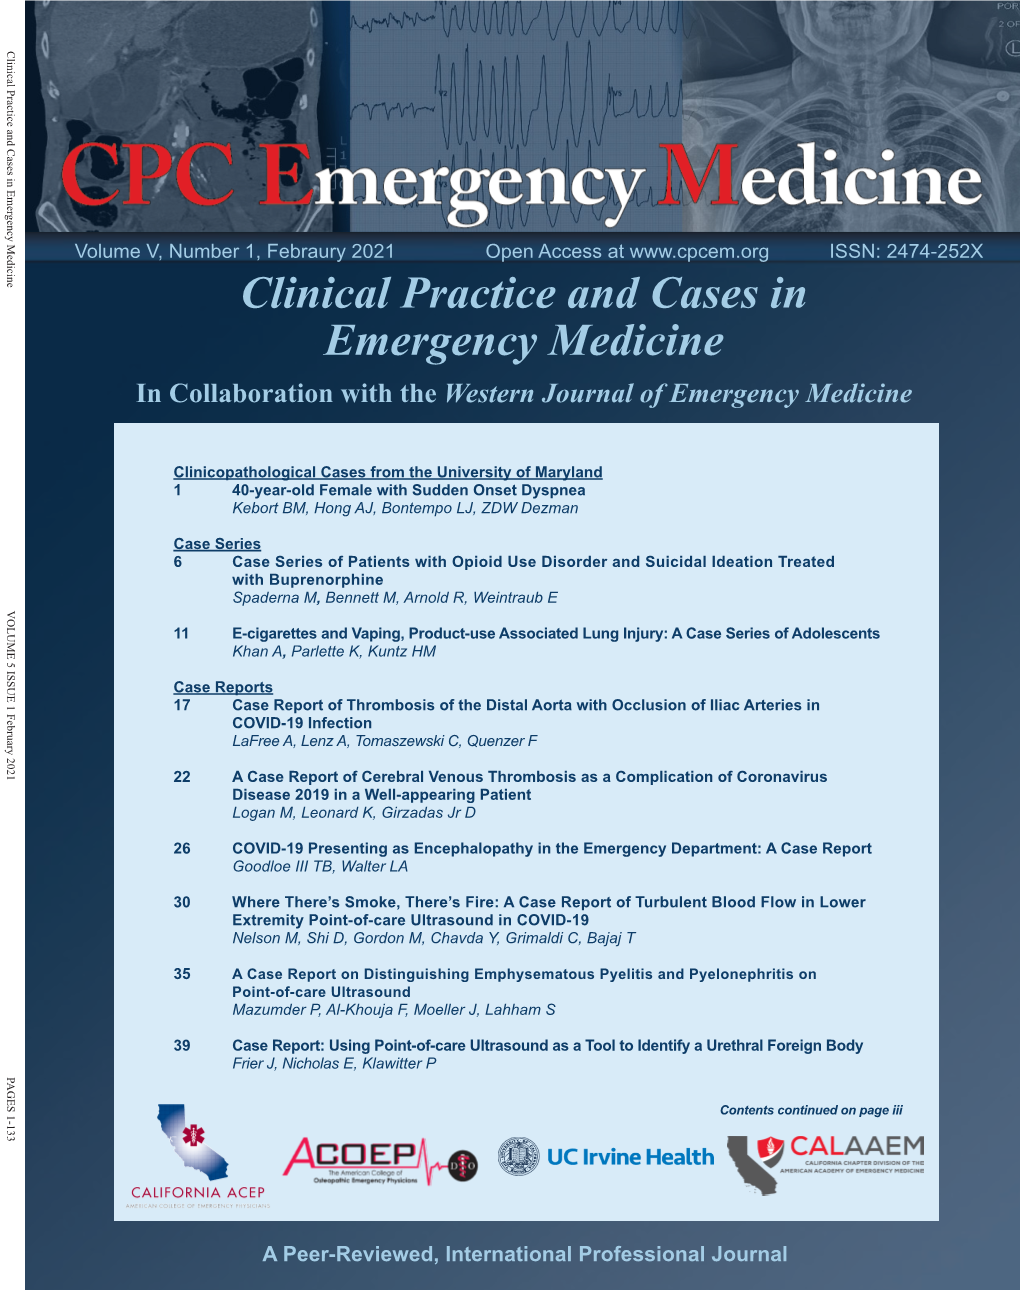 Clinical Practice and Cases in Emergency Medicine